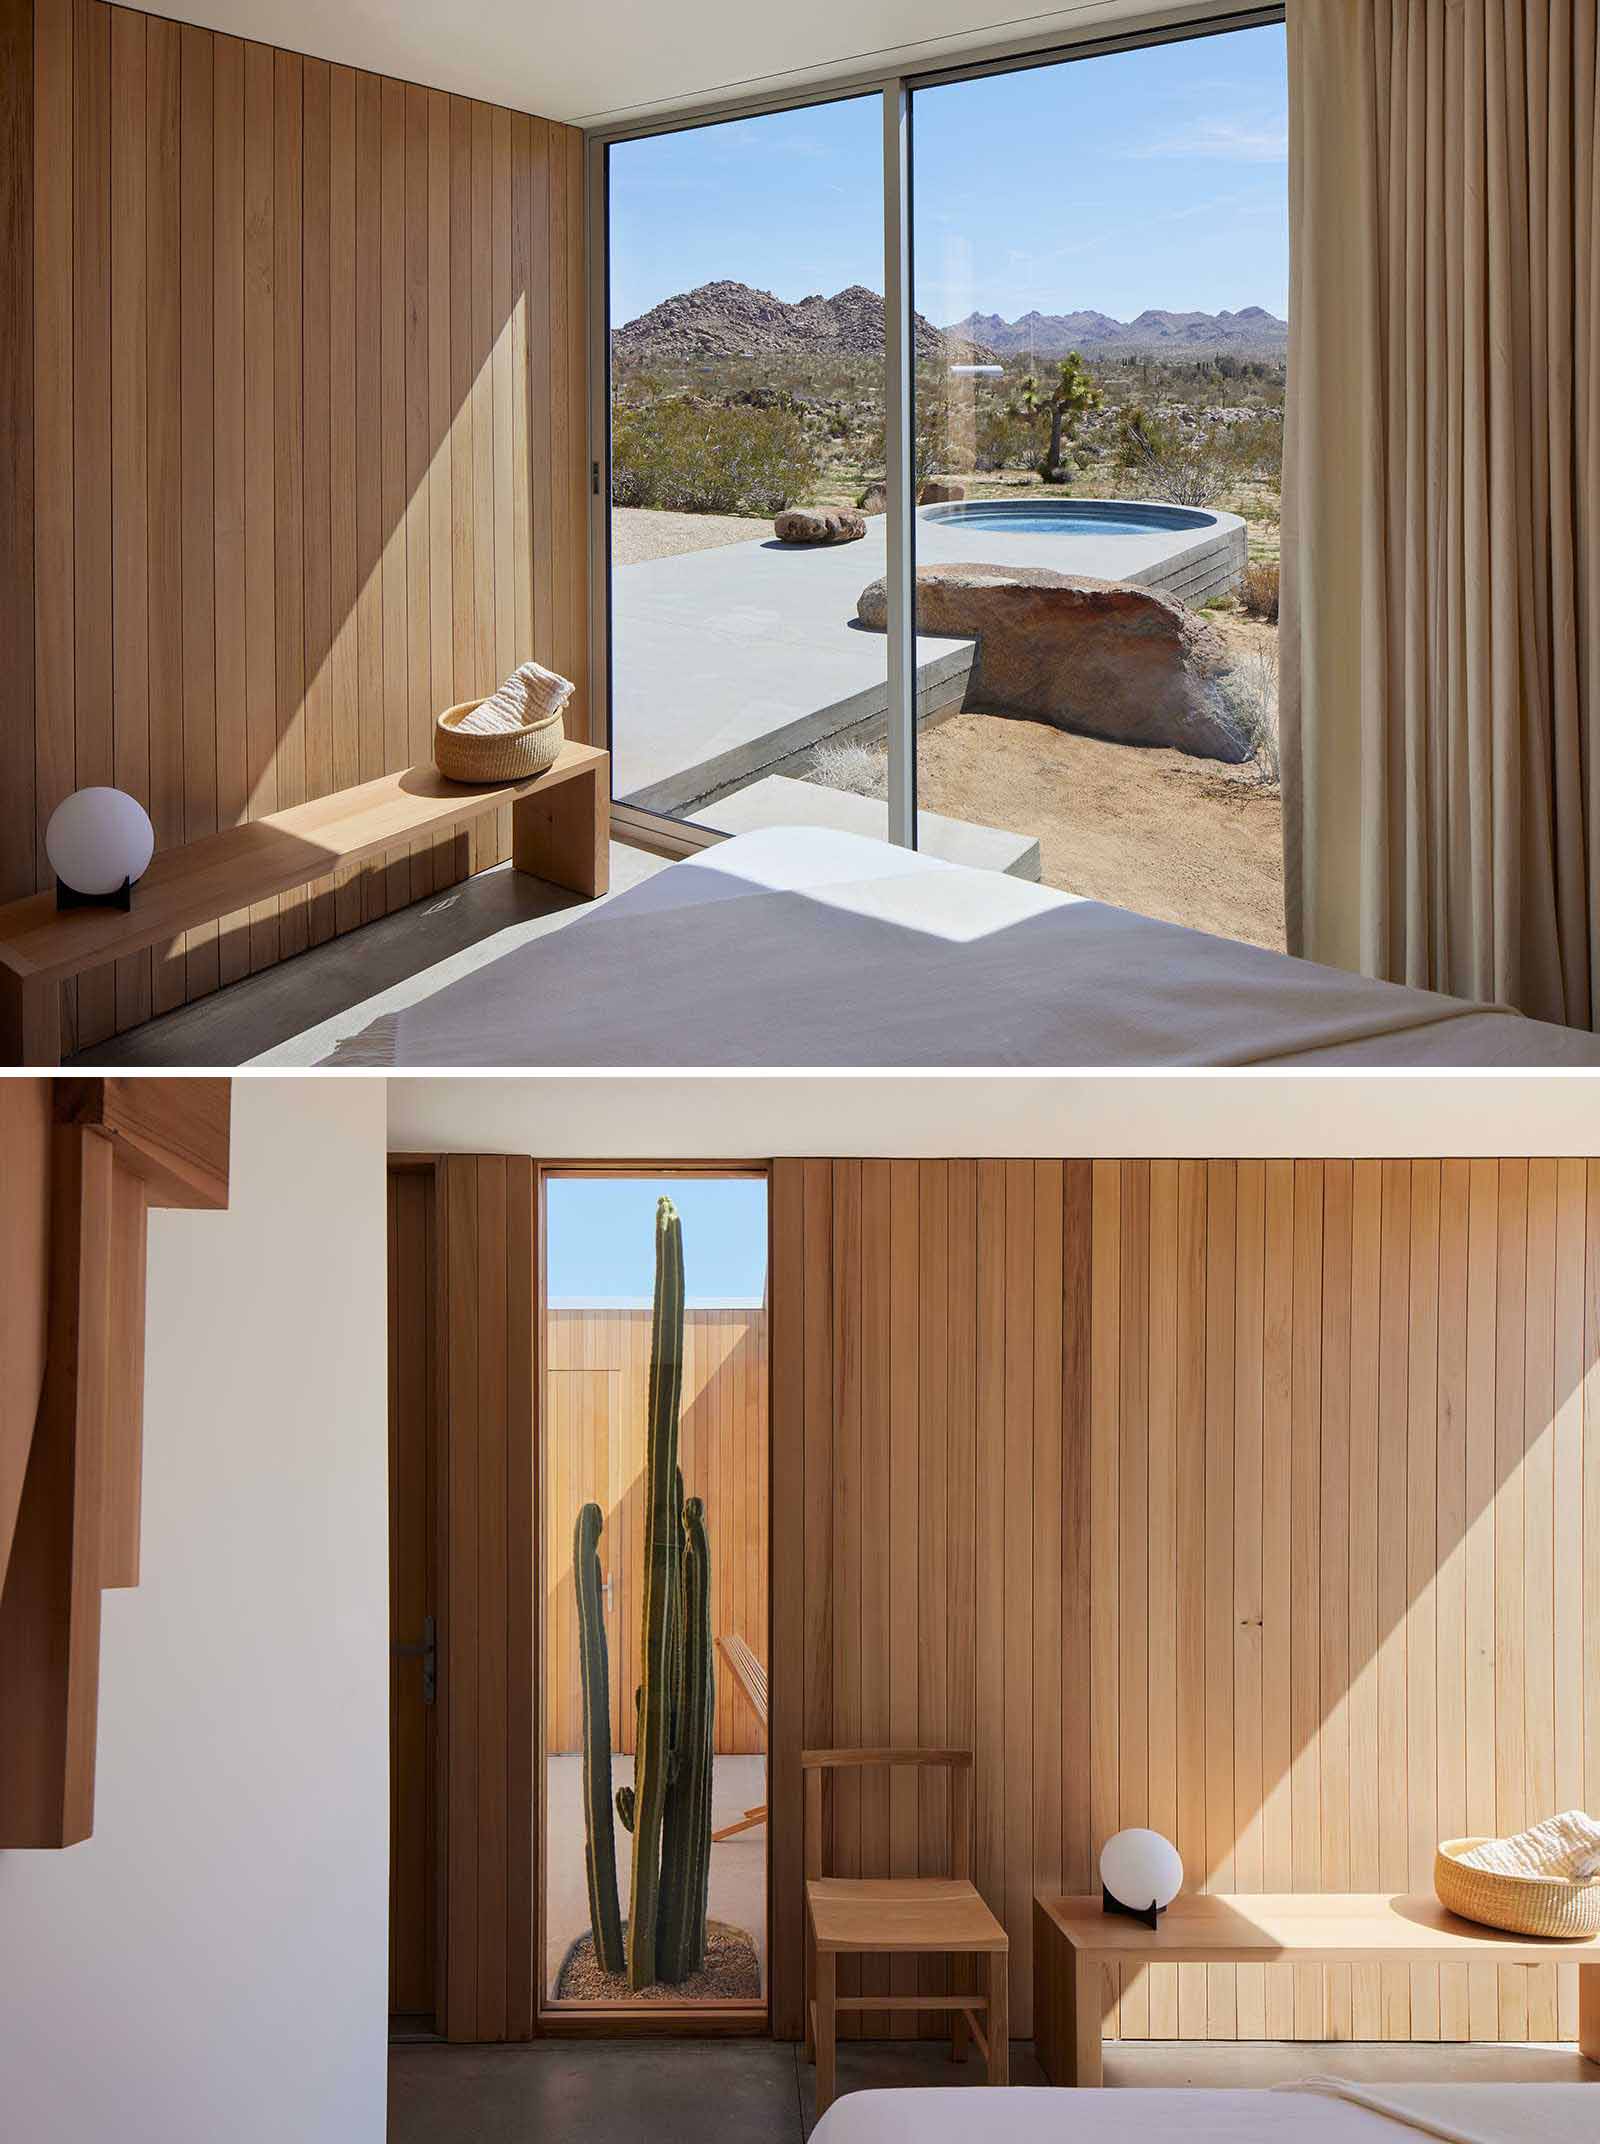 This modern bedroom includes cedar wall paneling that covers the walls.